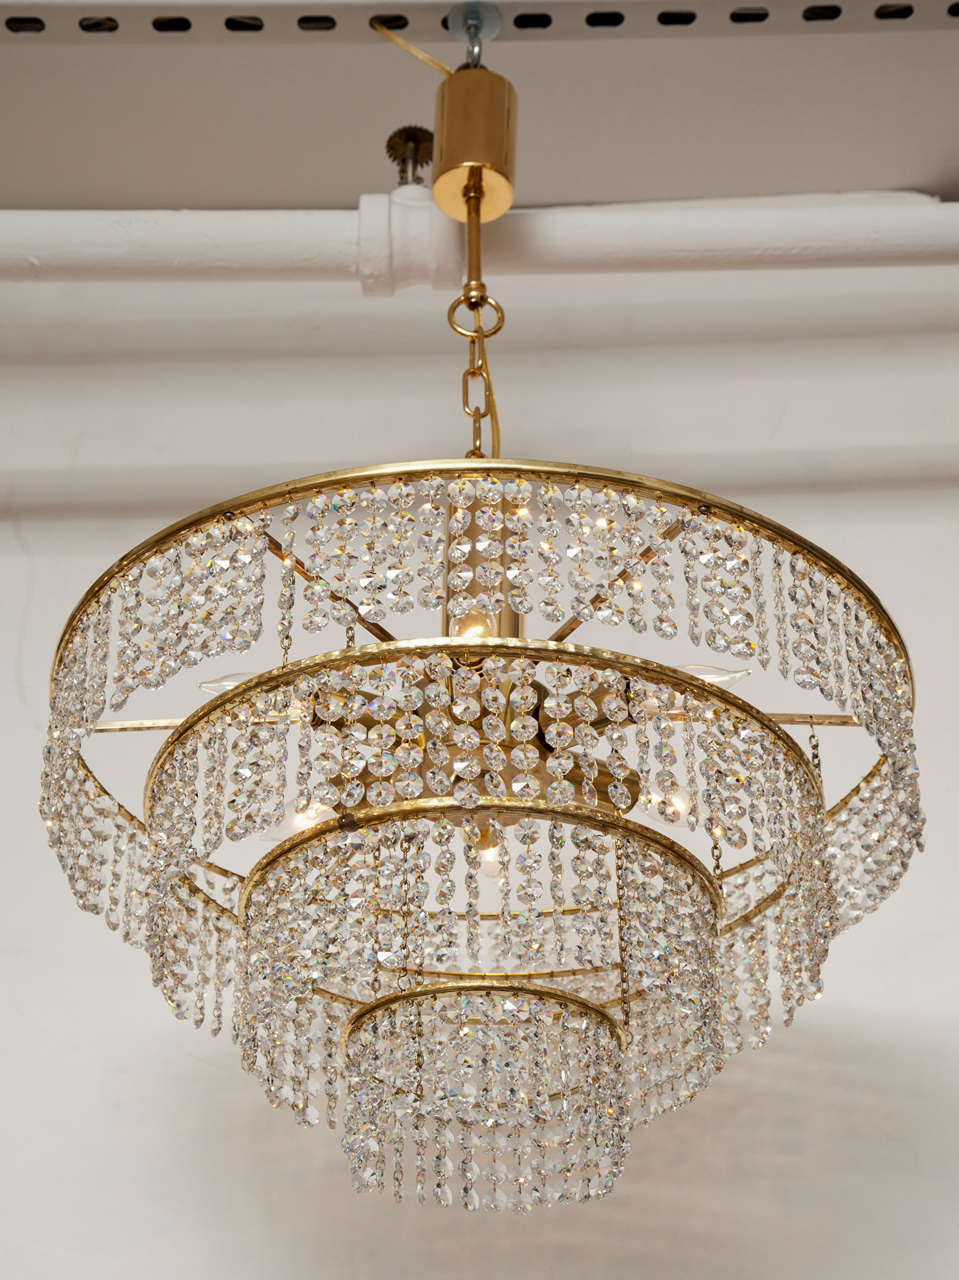 A lovely chandelier in brass and 24-karat gold plate with four tiers of sparkling crystals, circa 1950, from a German hotel.